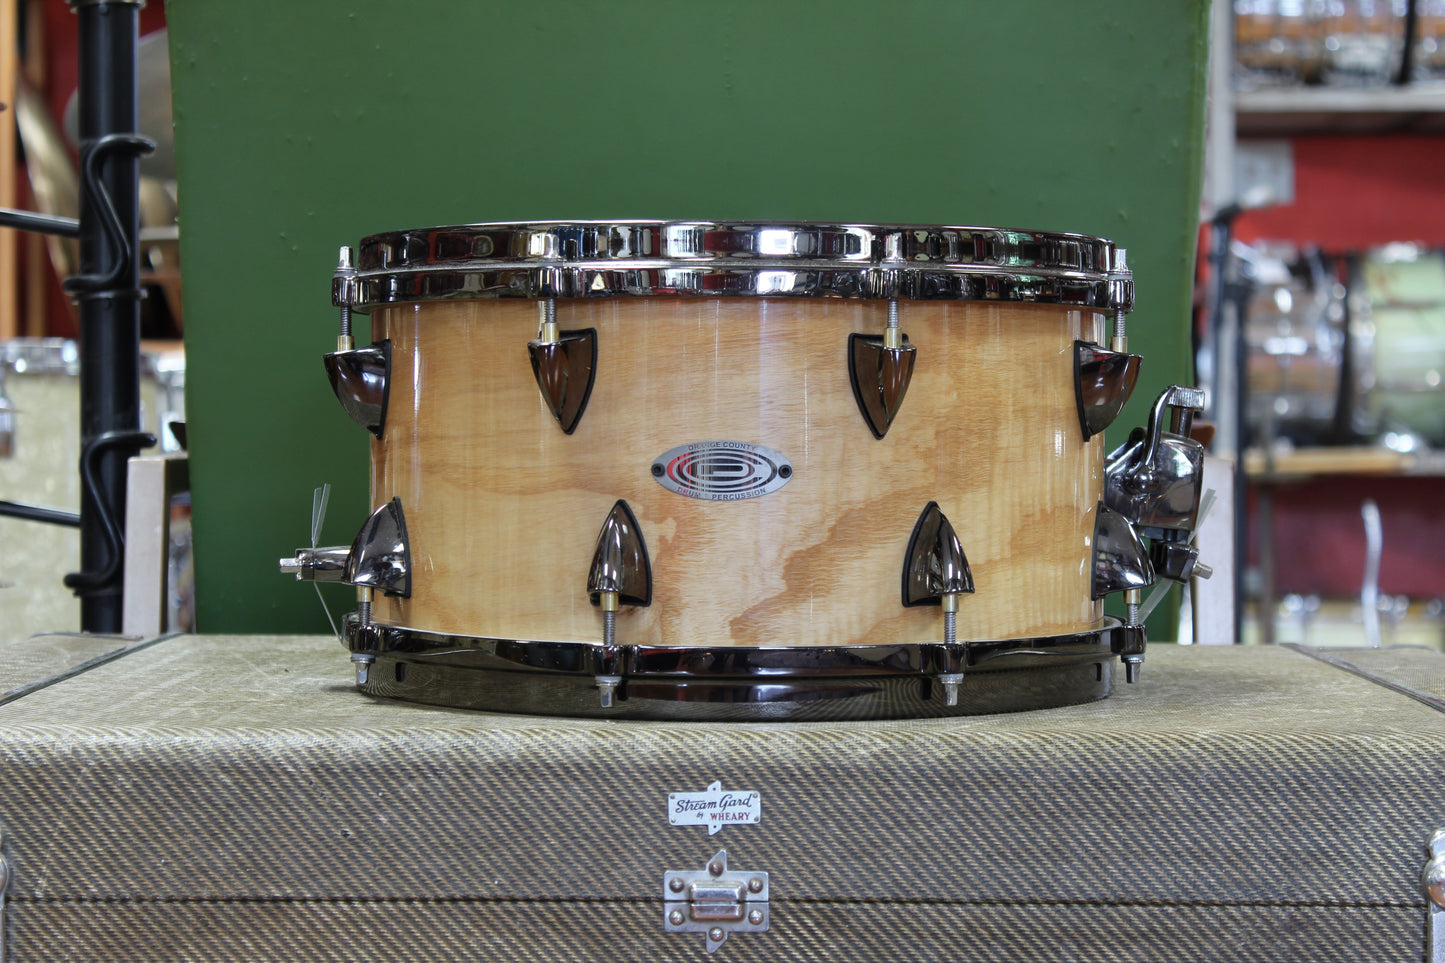 Used Orange County Drums & Percussion Maple Ash Snare Drum 7X13 in Natural Gloss